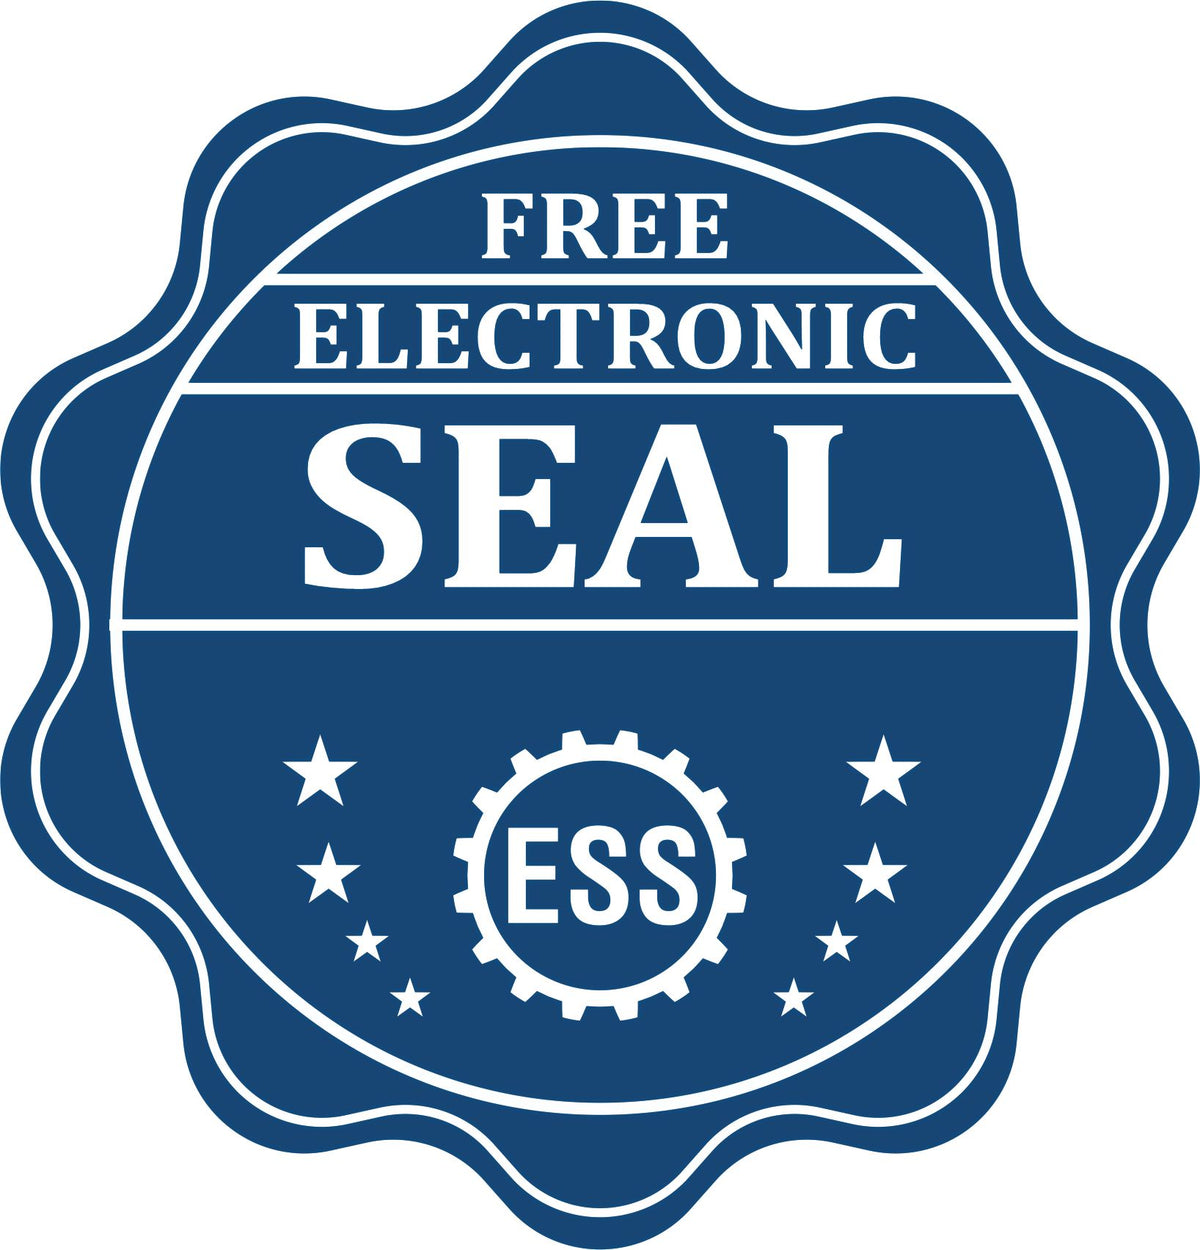 A badge showing a free electronic seal for the State of Alabama Architectural Seal Embosser with stars and the ESS gear on the emblem.